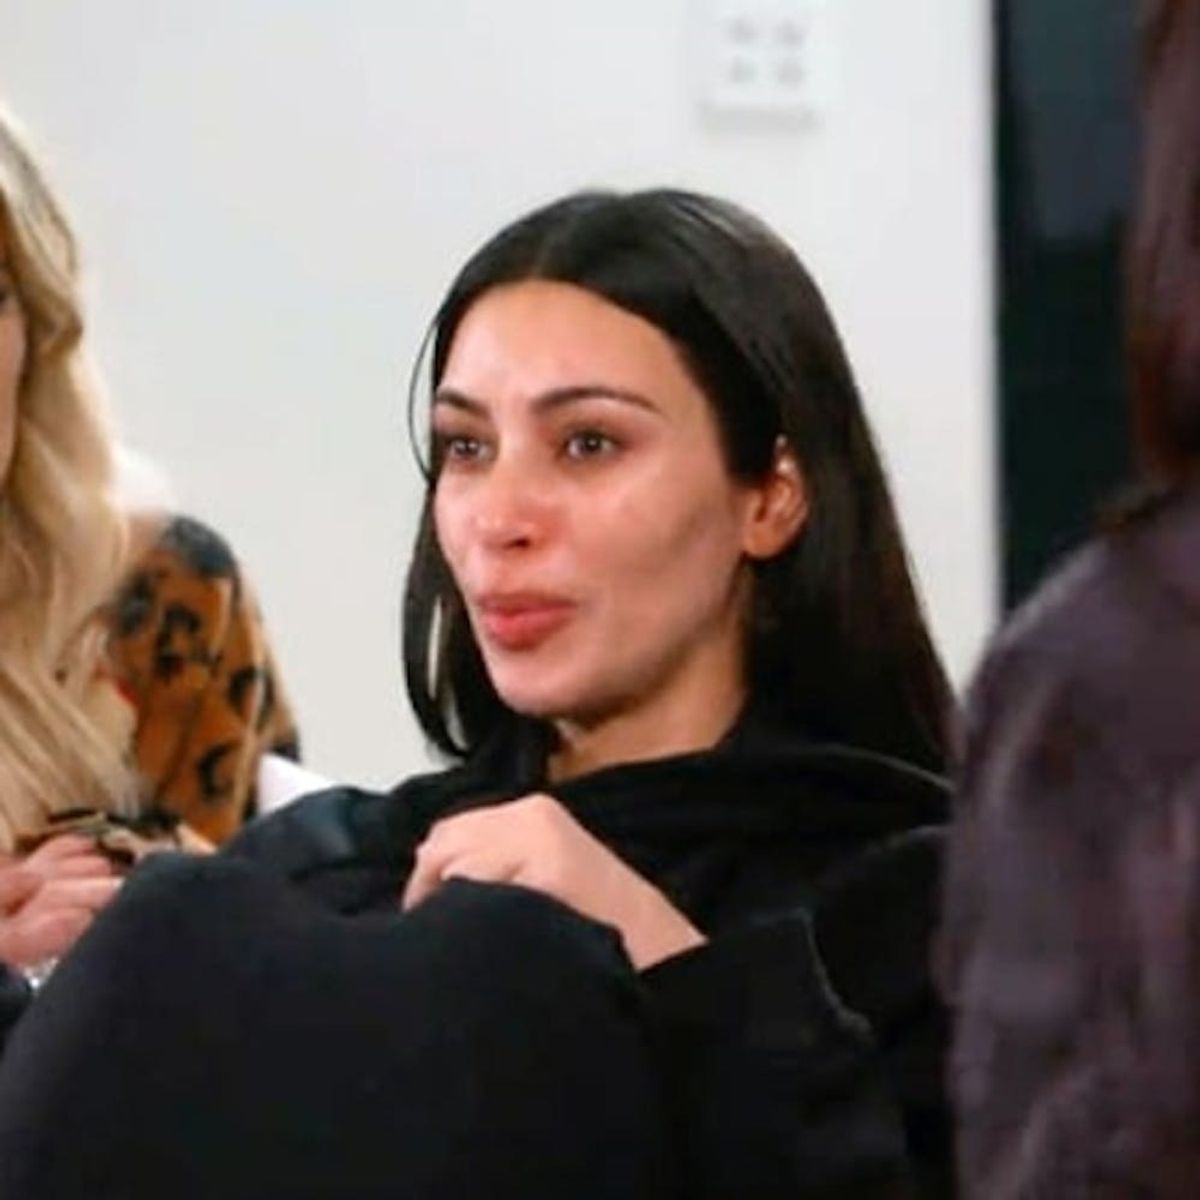 You’ll Need to Emotionally Prep Yourself for the KUWTK Episode About Kim’s Robbery